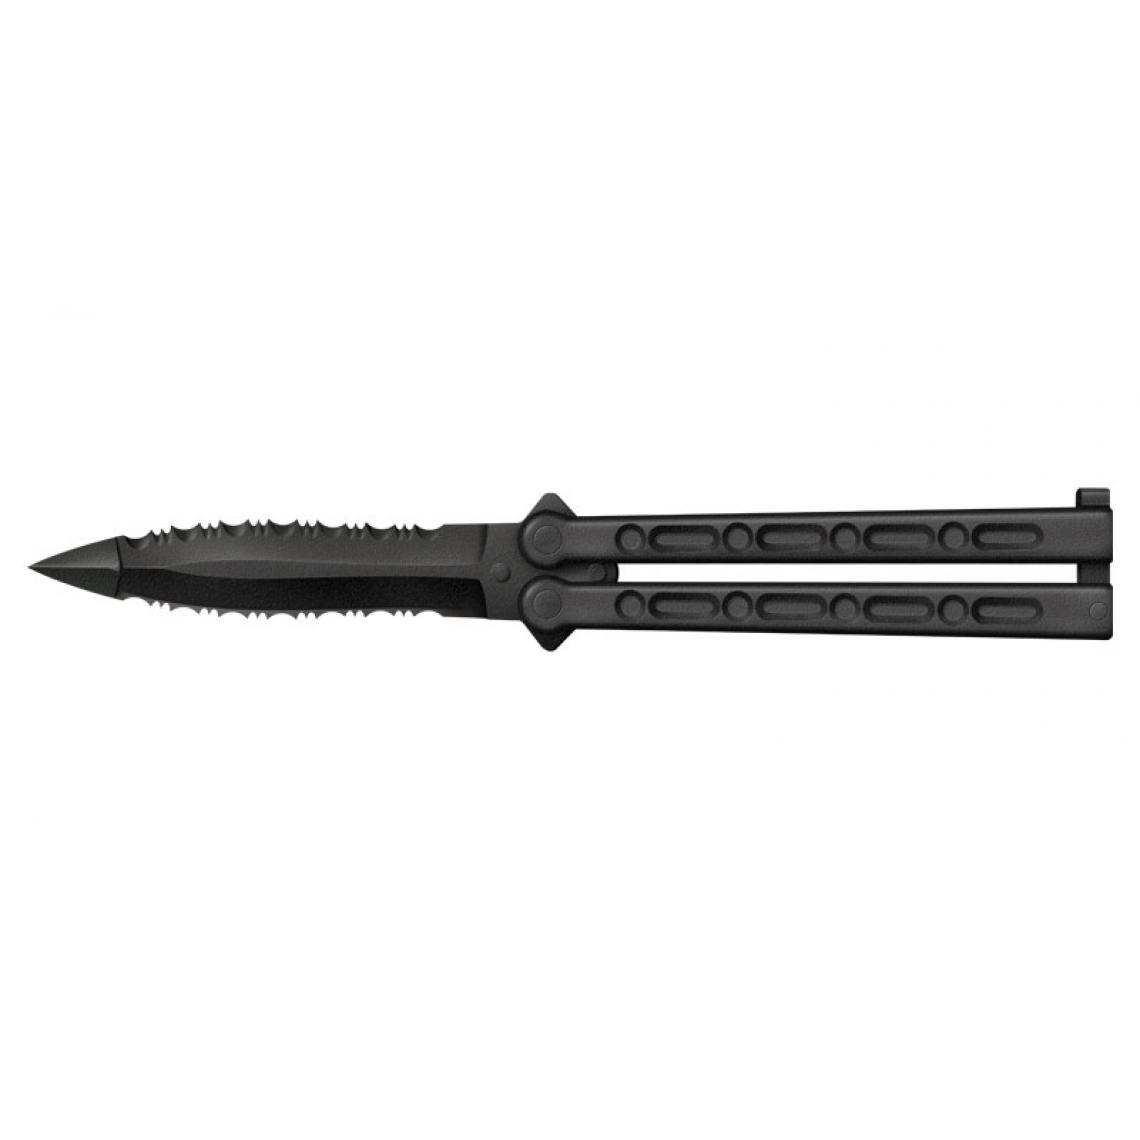 Divers Marques - COLD STEEL - CS92EAA - FGX BALISONG - Outils de coupe